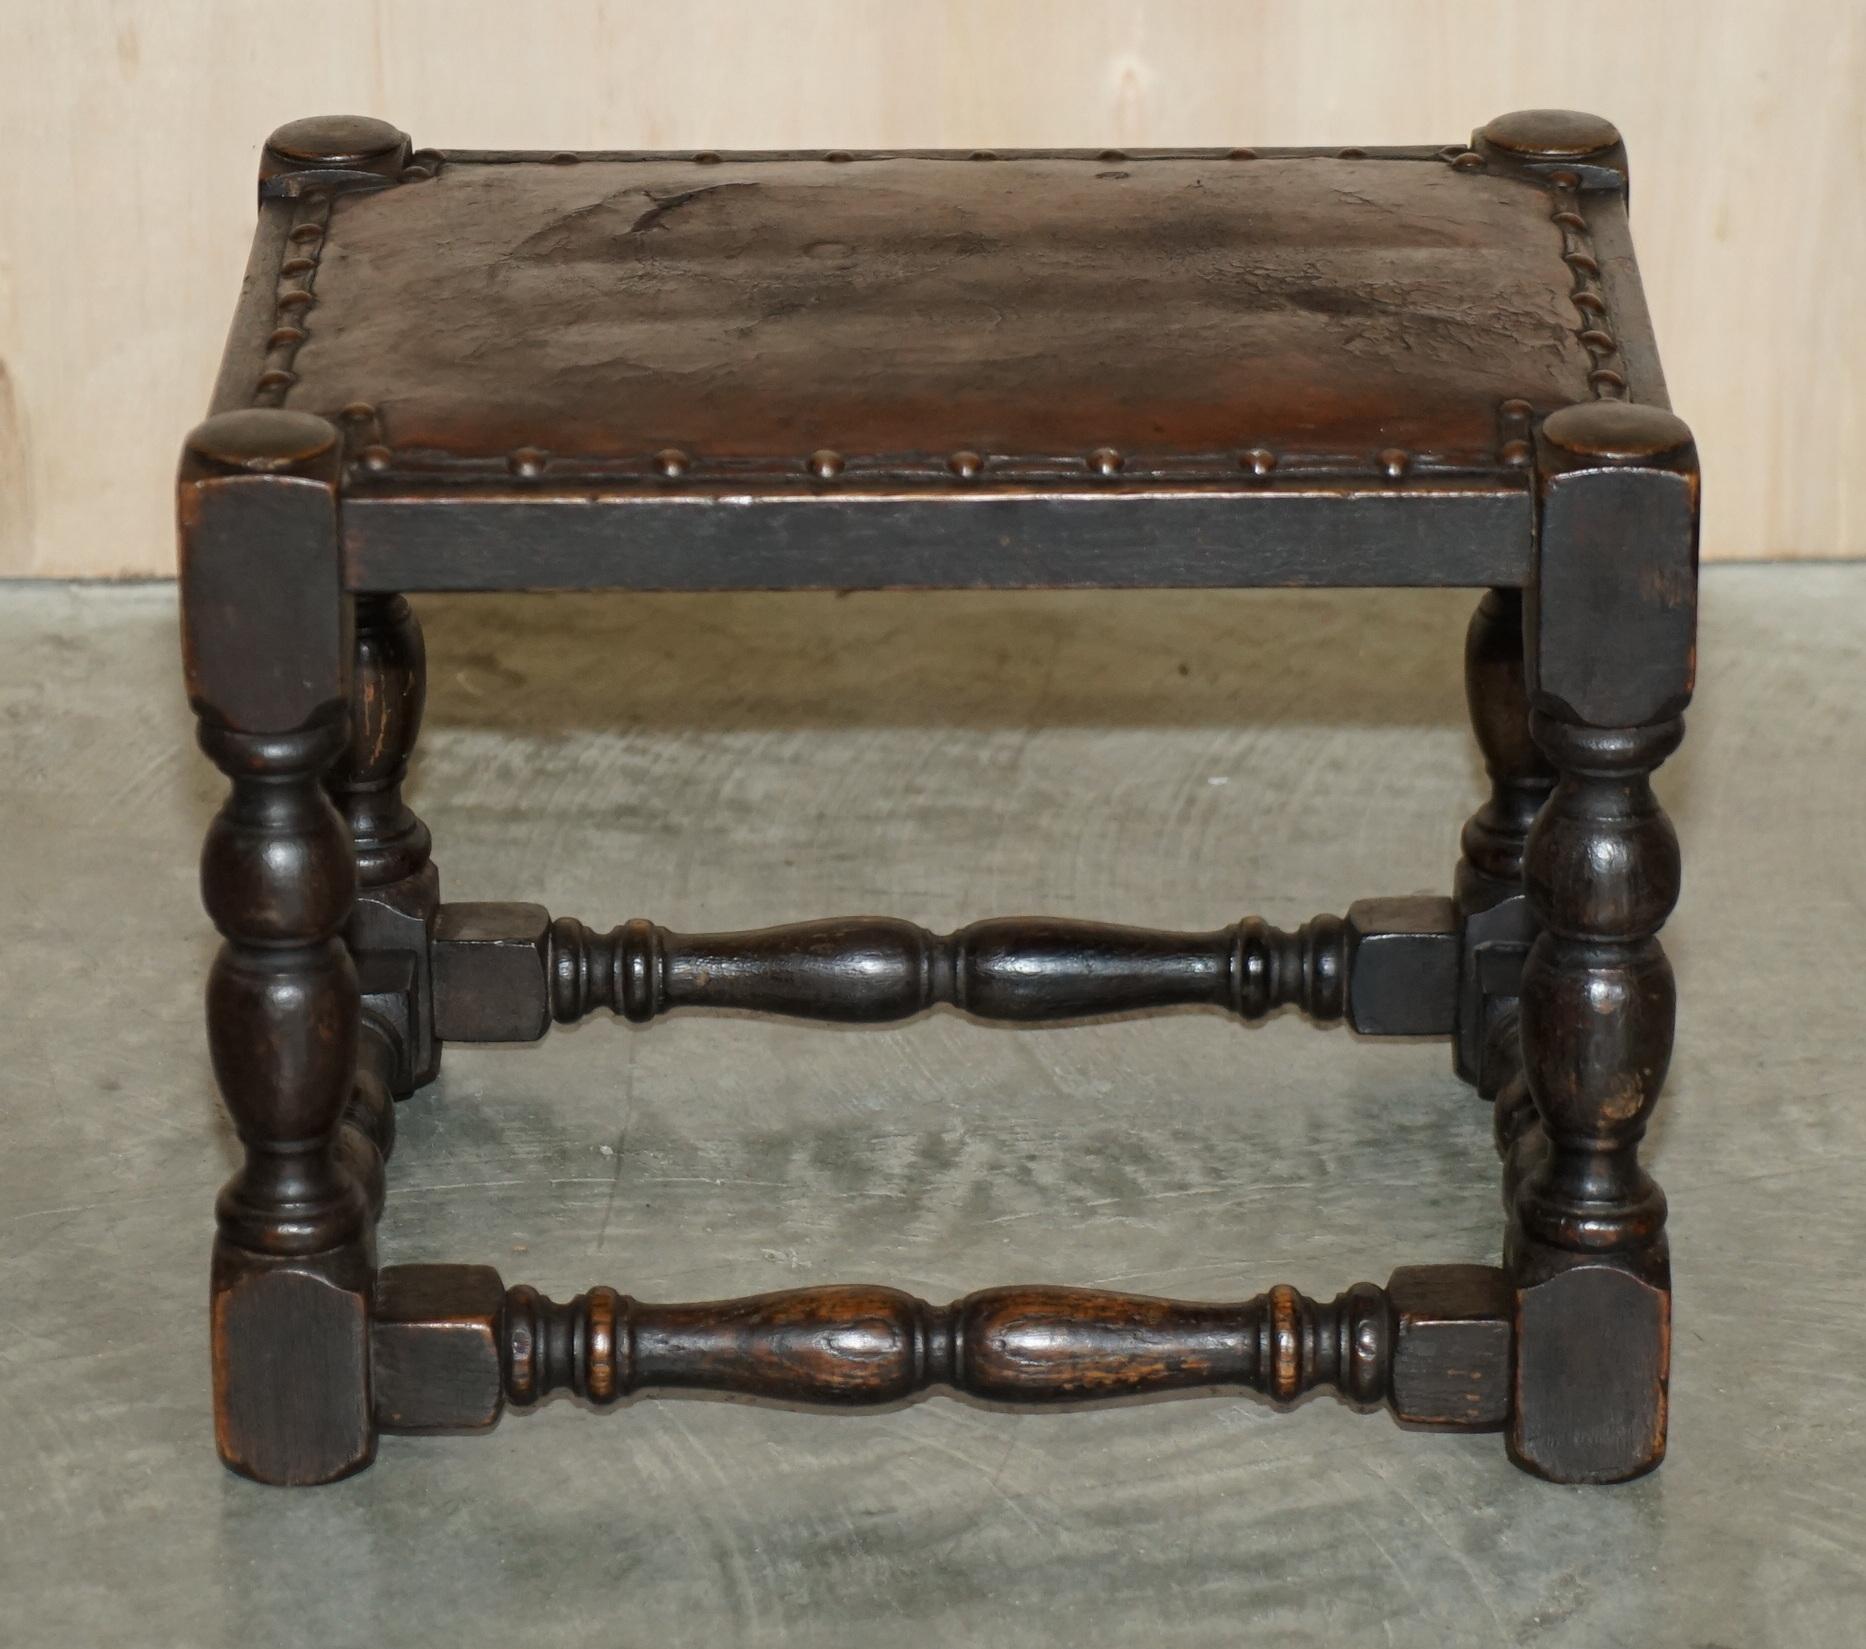 We are delighted to offer for sale this nice original hand made in England oak & leather footstool

A good looking and functional small footstool, the ideal size for one person to go with a club armchair

The condition is period, the upholstery